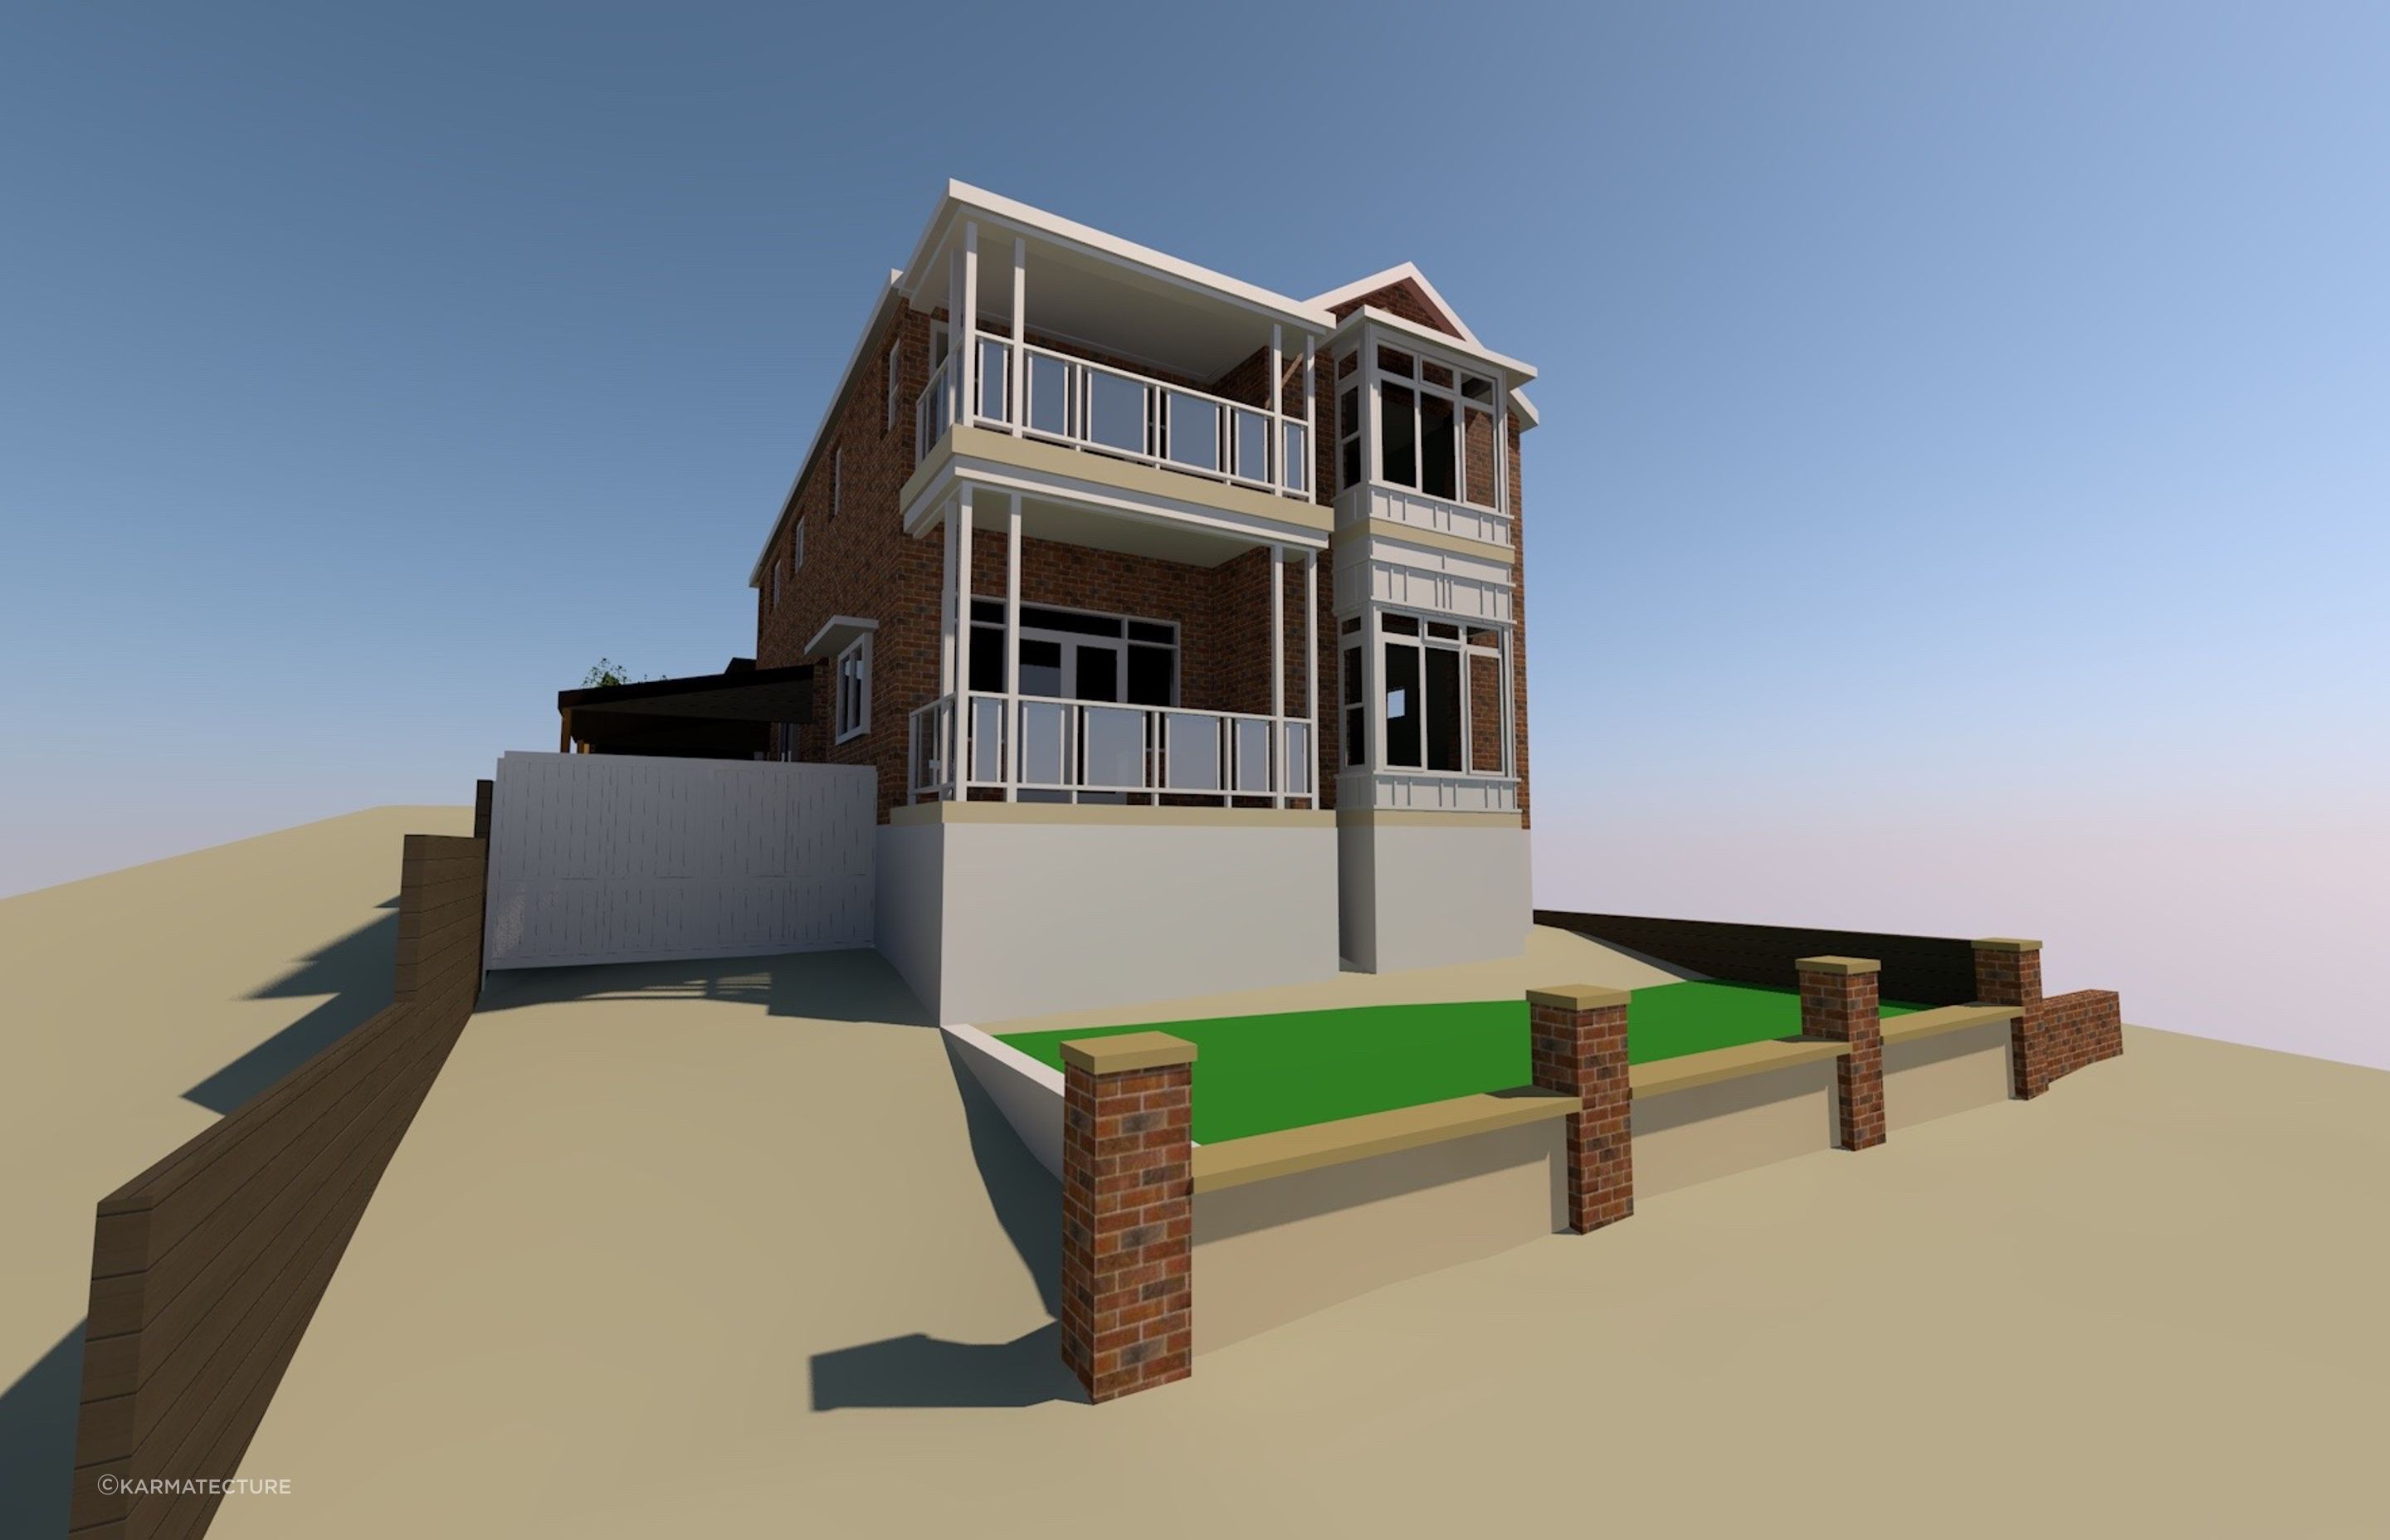 New balcony works include new, safer handrail detail and taller doors with new sidelights.Uncomfortable projections on ground and first floor have been transformed into bay windows to embrace the water and park views. No shading is required as they face due south. Modified front fence with sandstone capping and rubble render.